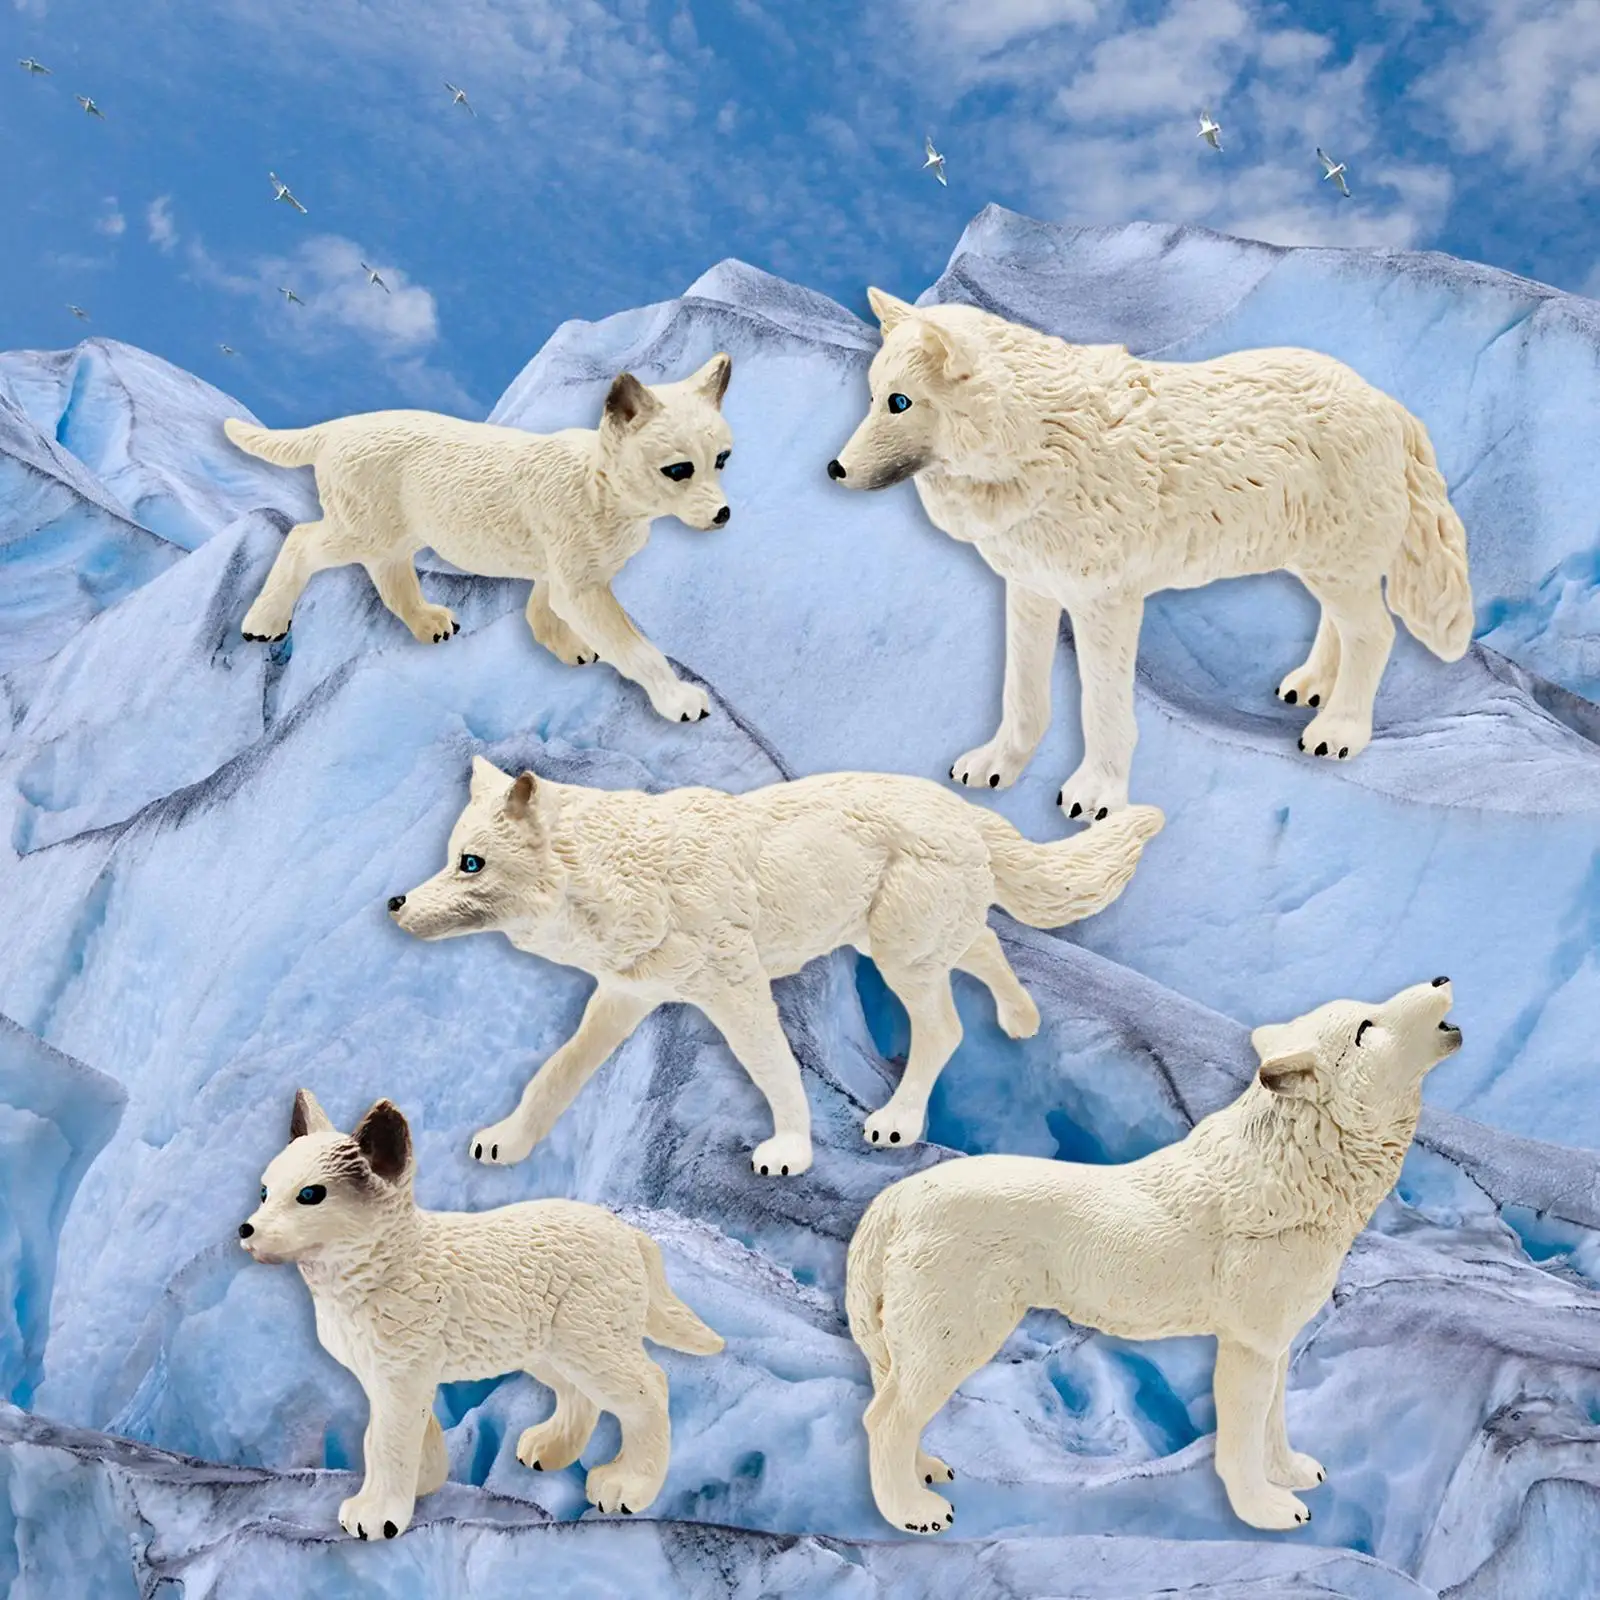 5Pcs Wolf Toy Figurines Wolf Animal Figures for Xmas Present Birthday Gifts